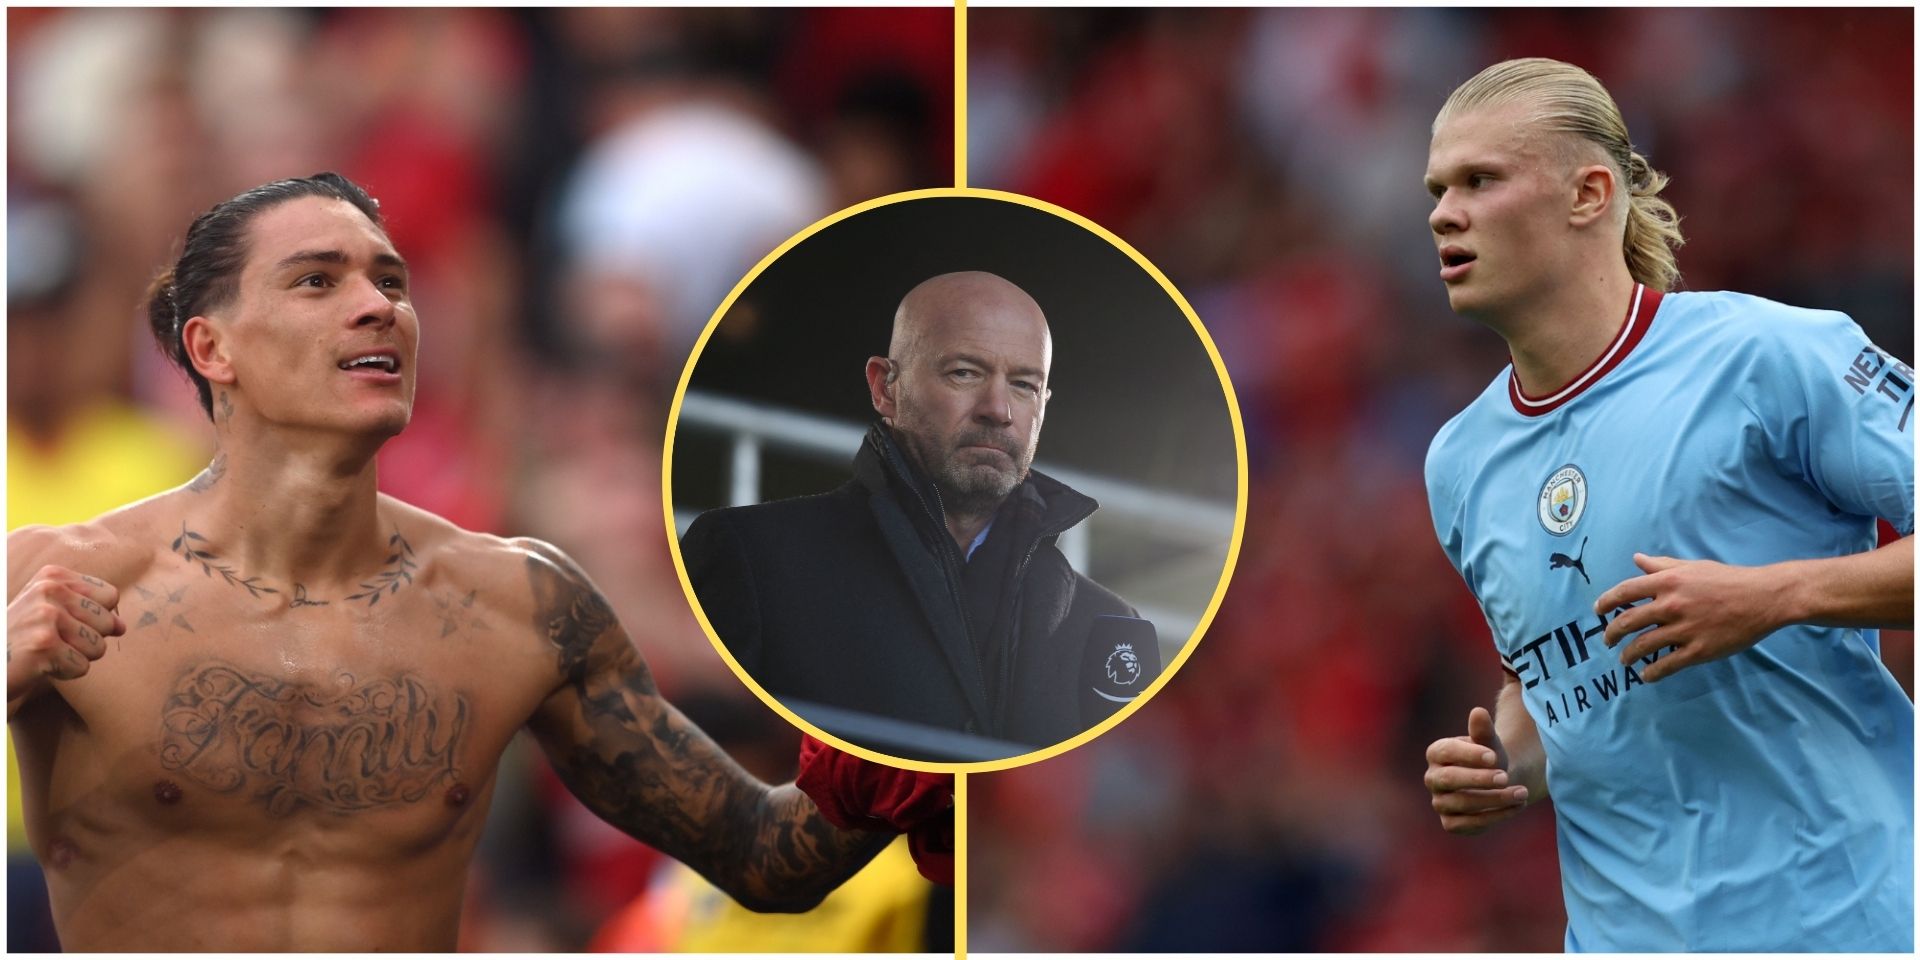 Shearer predicts one big-money signing will decide Liverpool & Man City title race